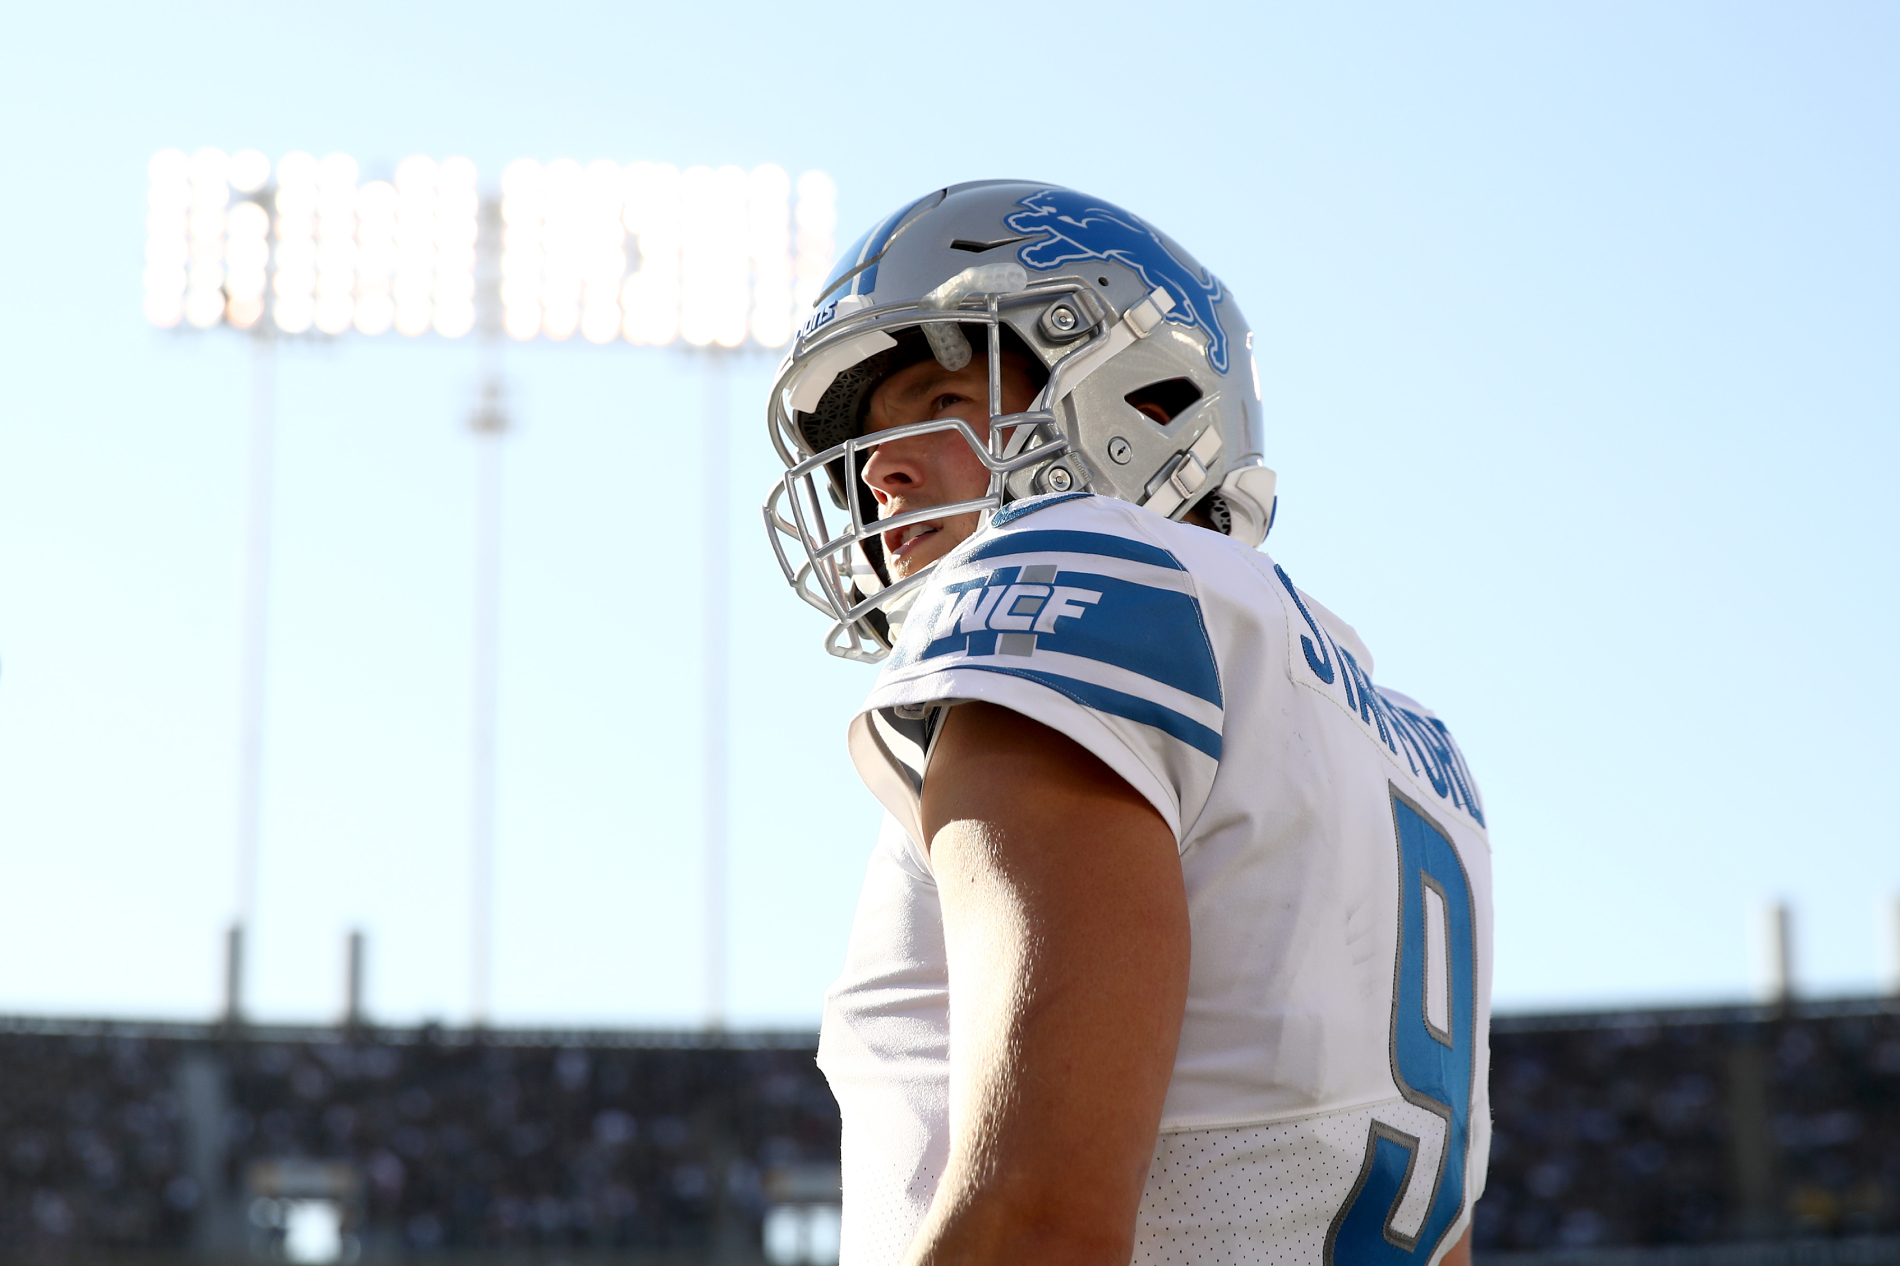 Matthew Stafford has been a successful quarterback for the Lions, but has lost a bunch of games. He still has a massive net worth, though.